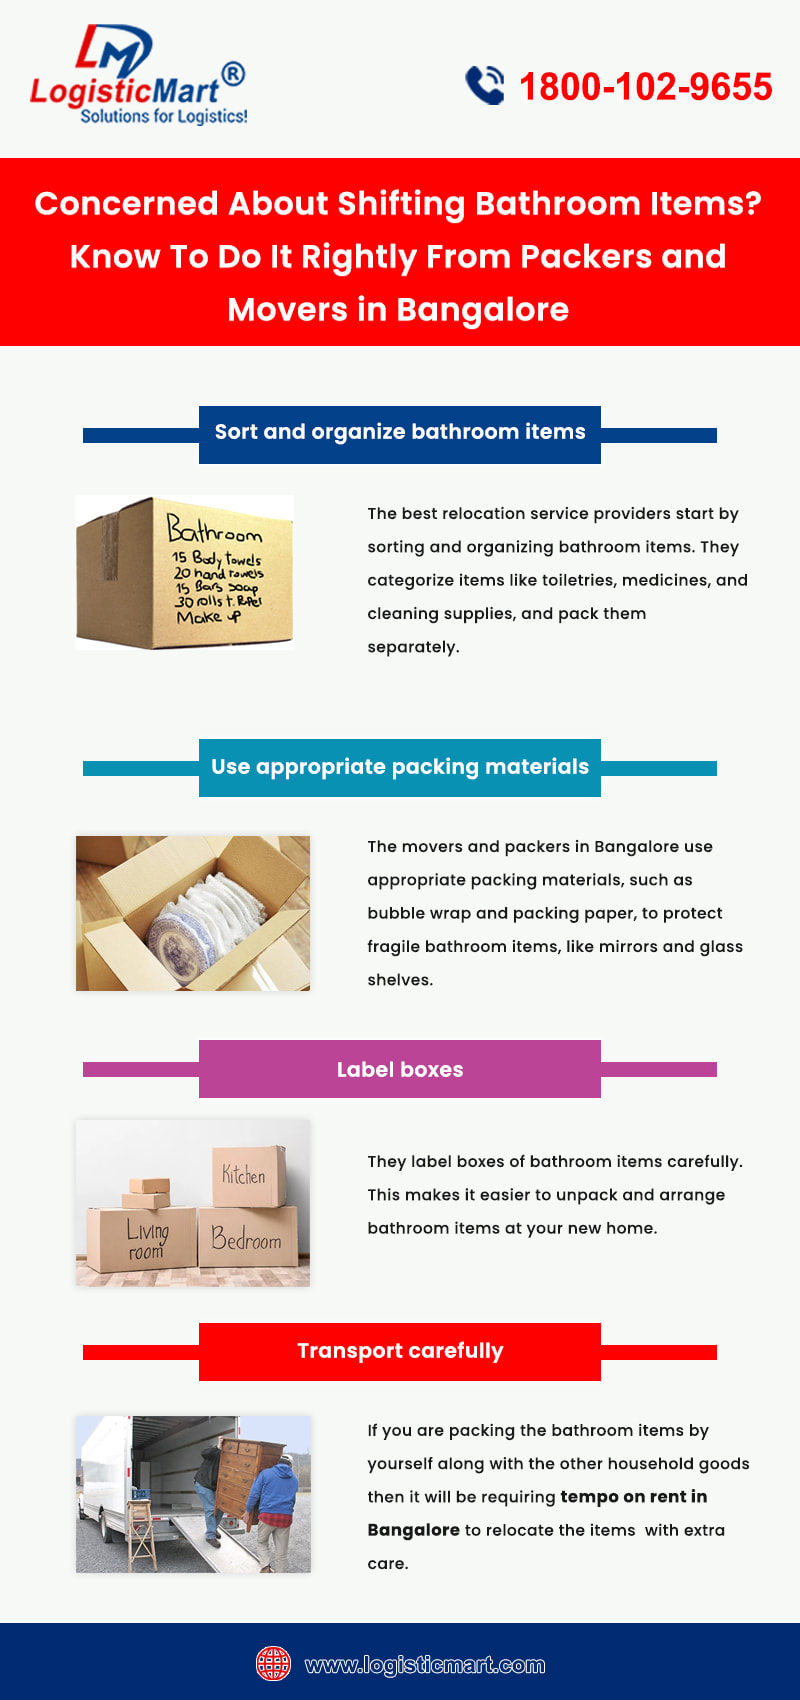 Movers and Packers in Bangalore - LogisticMart